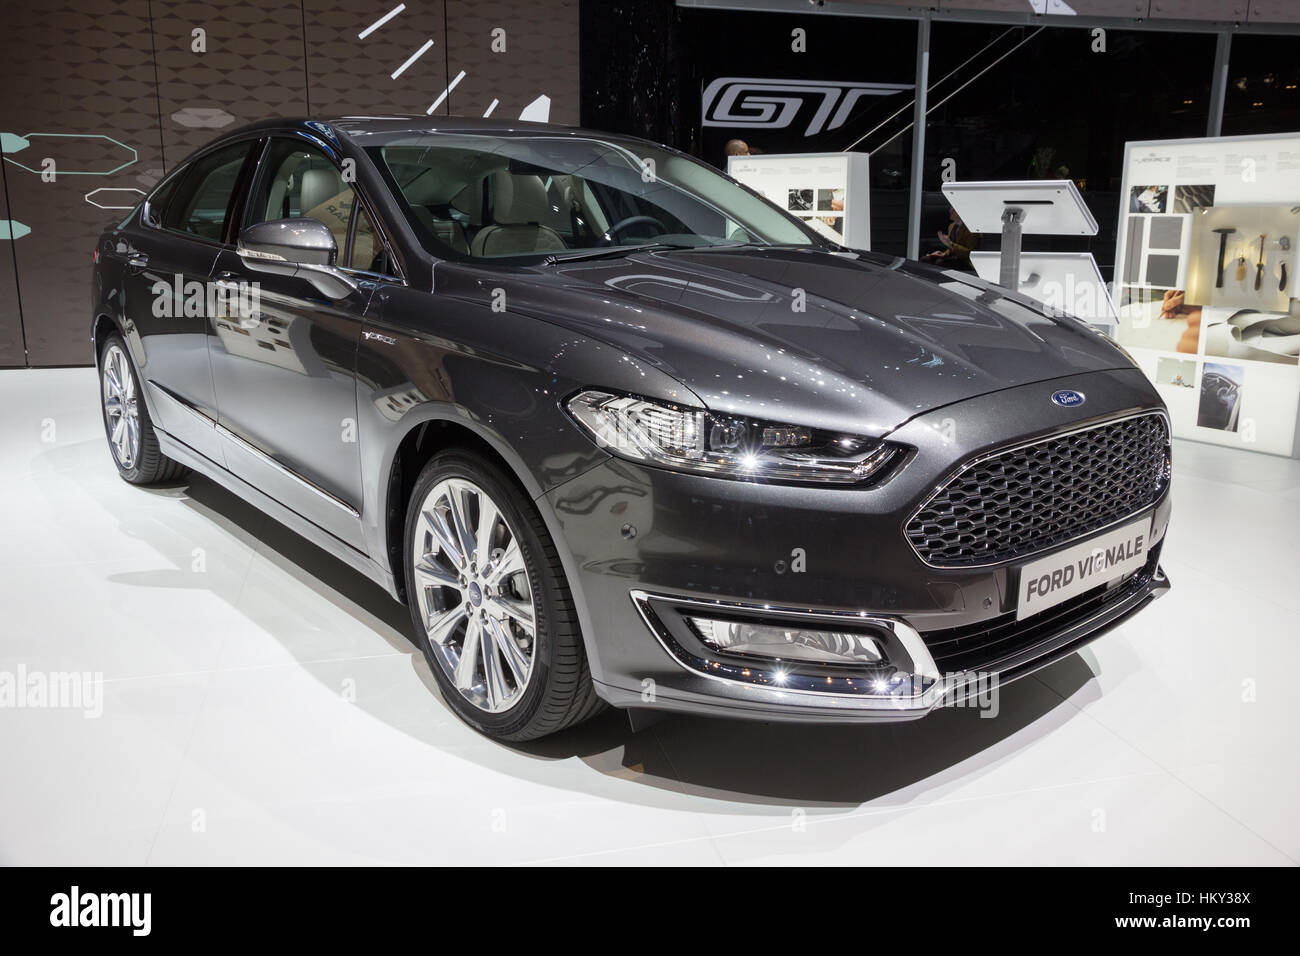 sturen club amplitude Ford Mondeo Car Show High Resolution Stock Photography and Images - Alamy